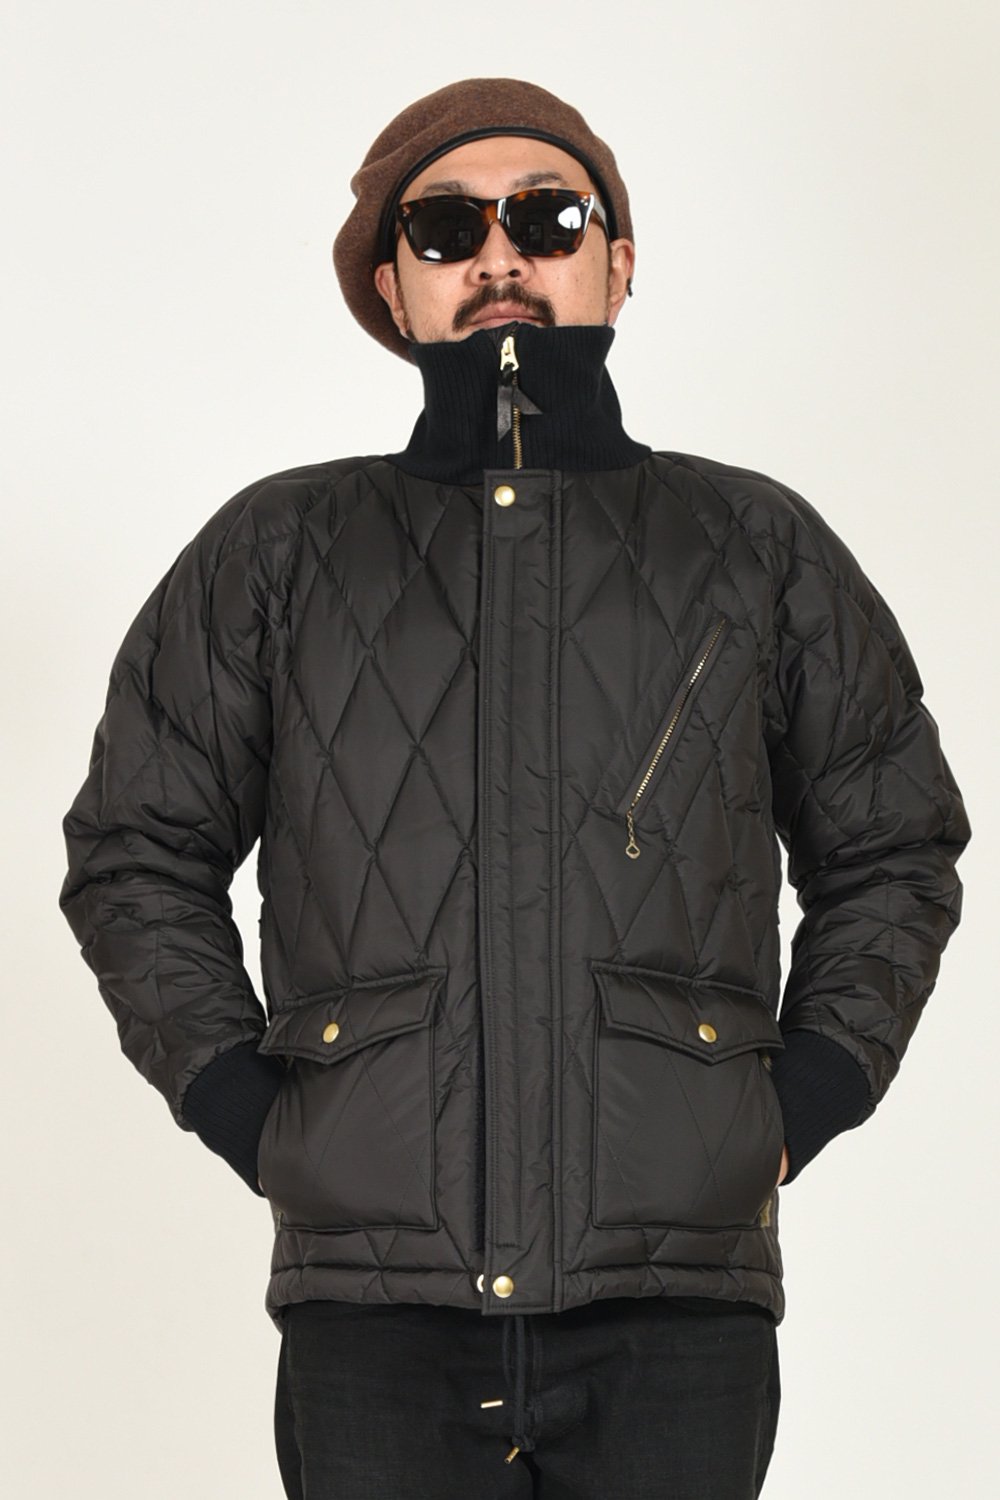 WESTRIDE(ウエストライド) レーシングダウンジャケット ALL NEW RACING DOWN JKT2 RELAX FIT with  WIND GUARD HJW-02RF | ハーレムストア公式通販サイト